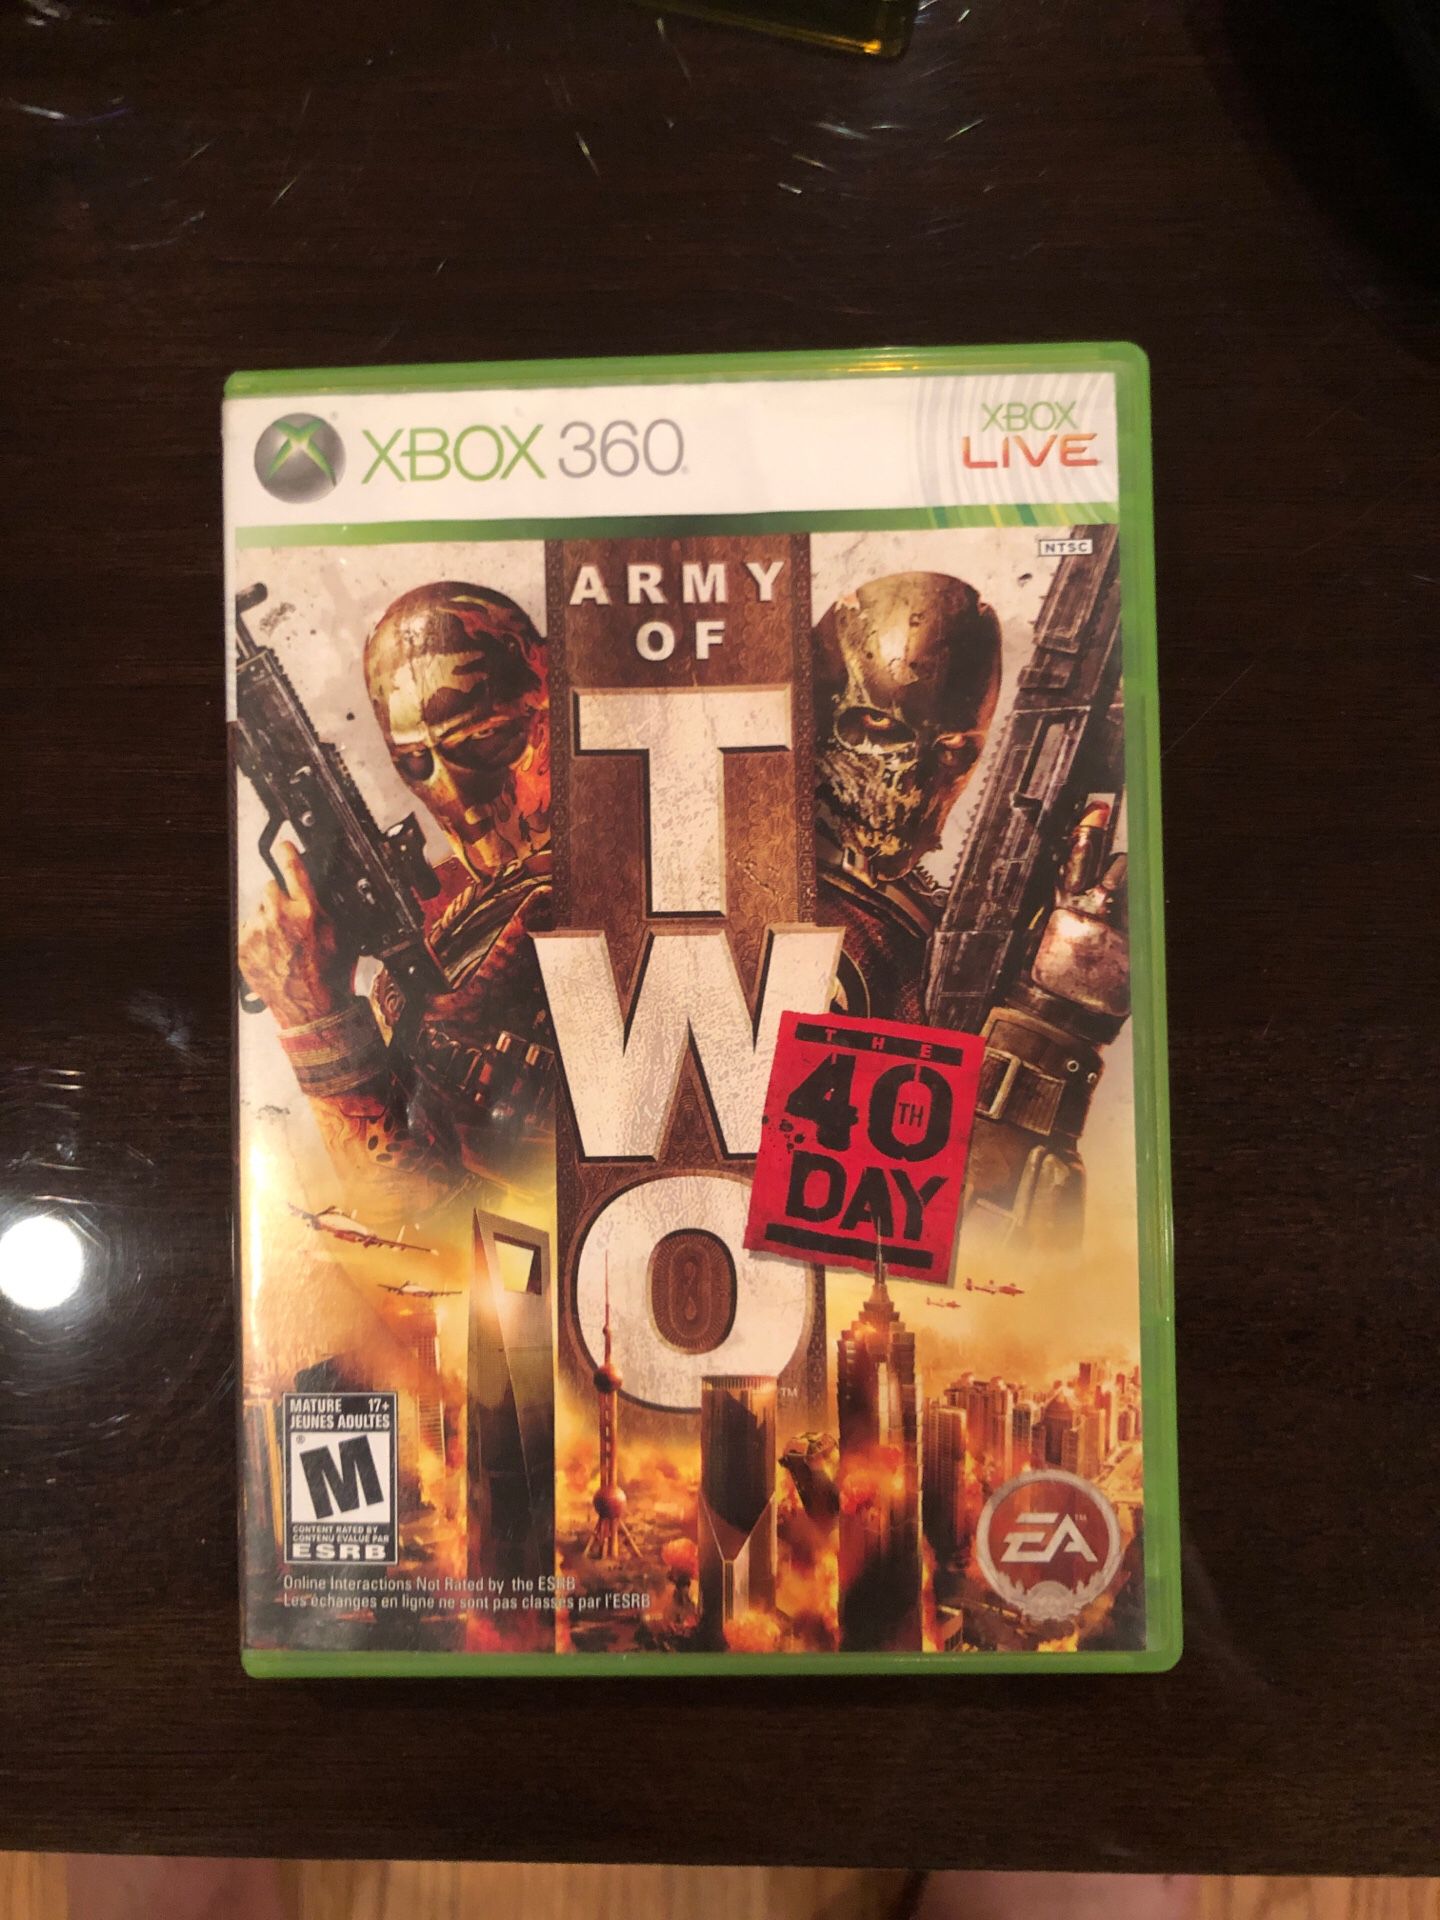 Army of two 40 day Xbox 360 game